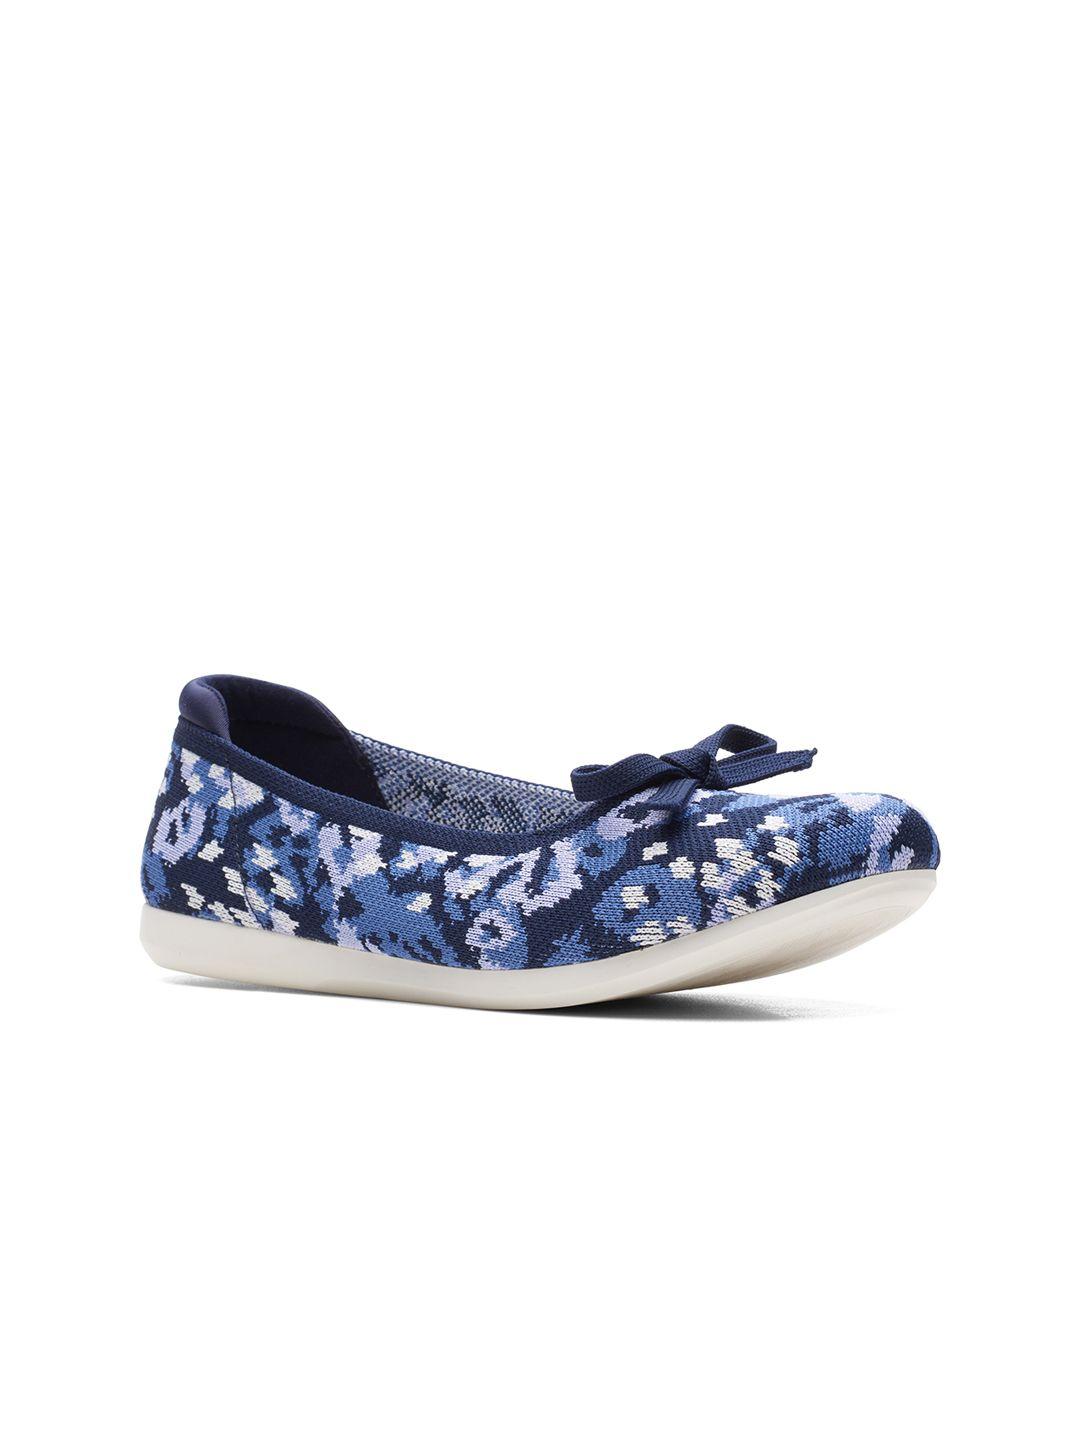 clarks-women-printed-ballerinas-with-bows